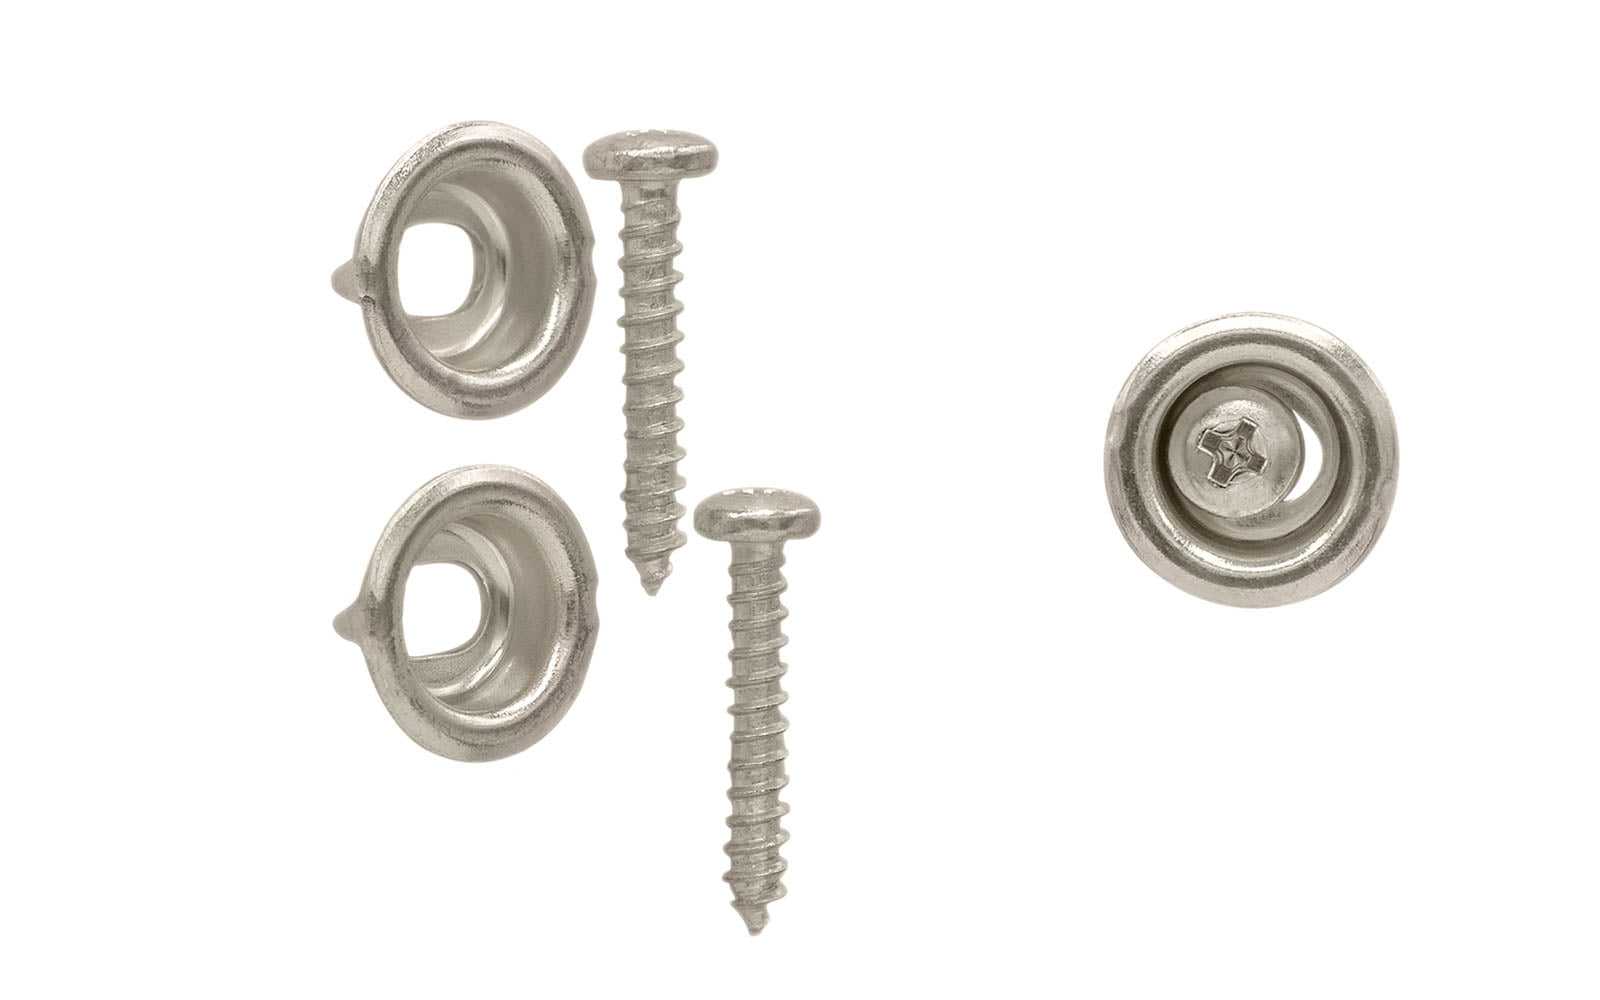 Vintage-style Hardware · Solid Brass Sash Stop Bead Adjusters - Pair. Made of solid brass - Allows 1/8